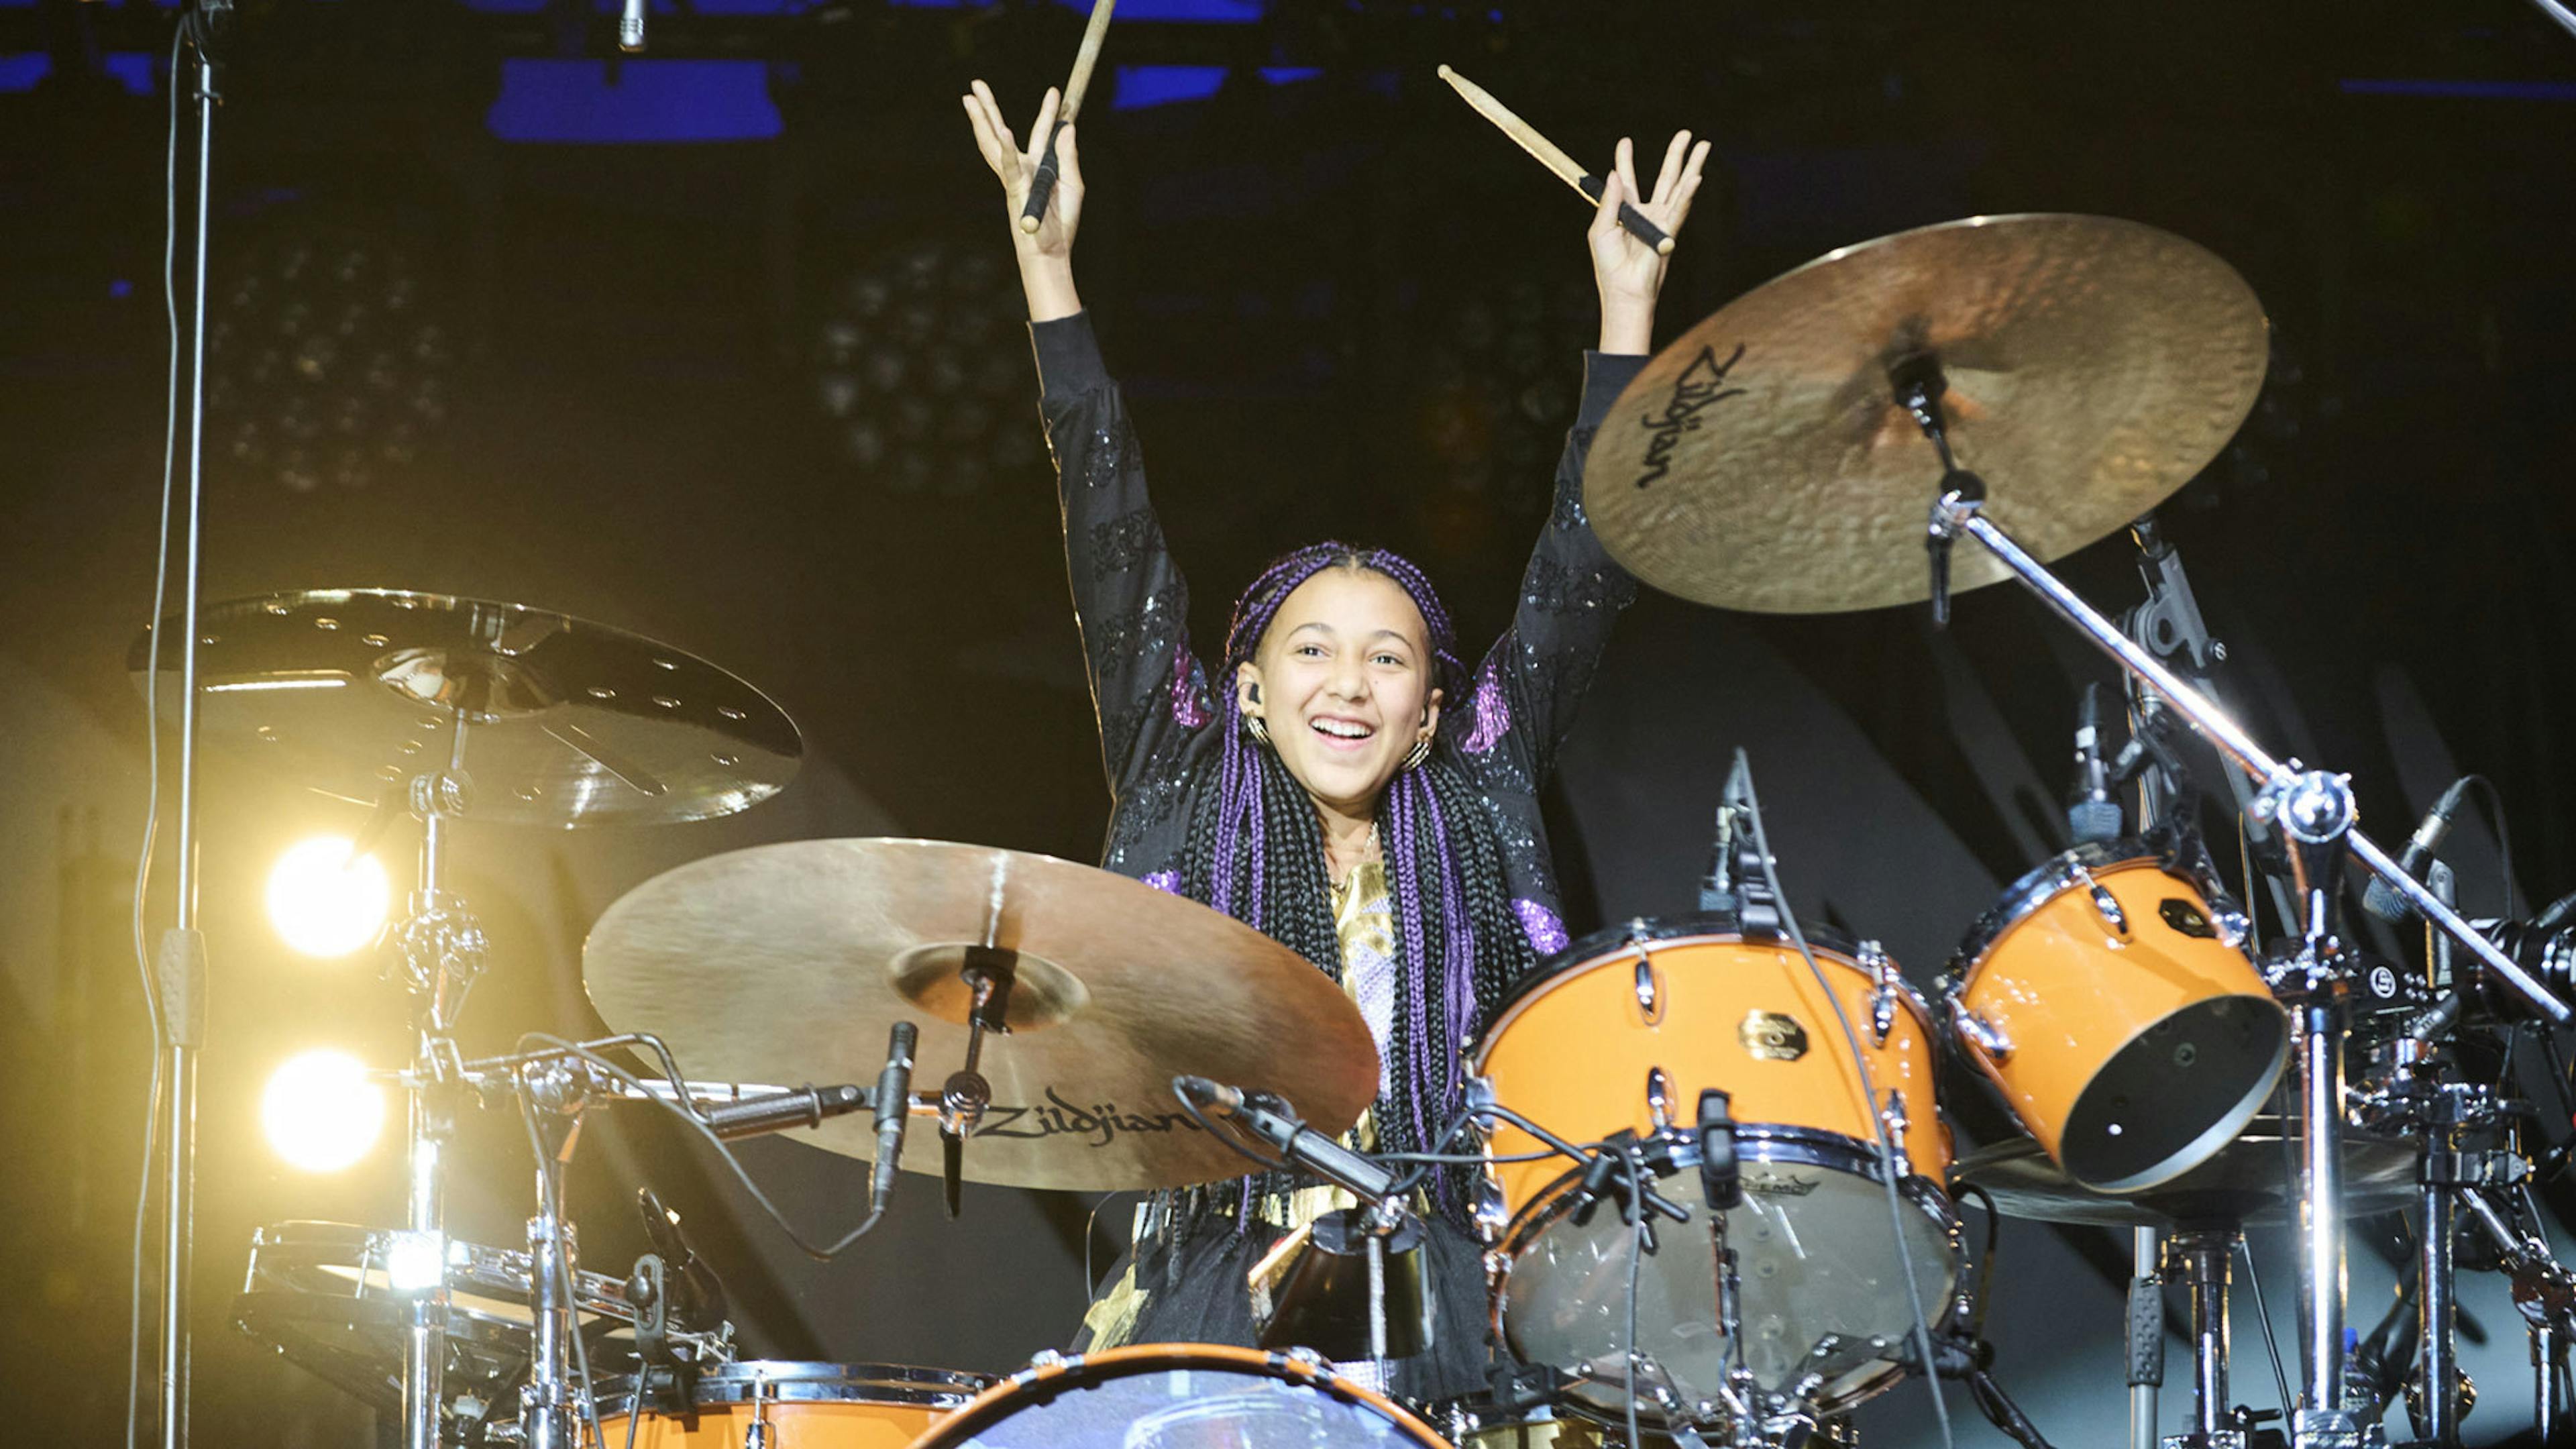 “I gave it everything I had”: 12-year-old Nandi Bushell shares full video of Taylor Hawkins tribute performance